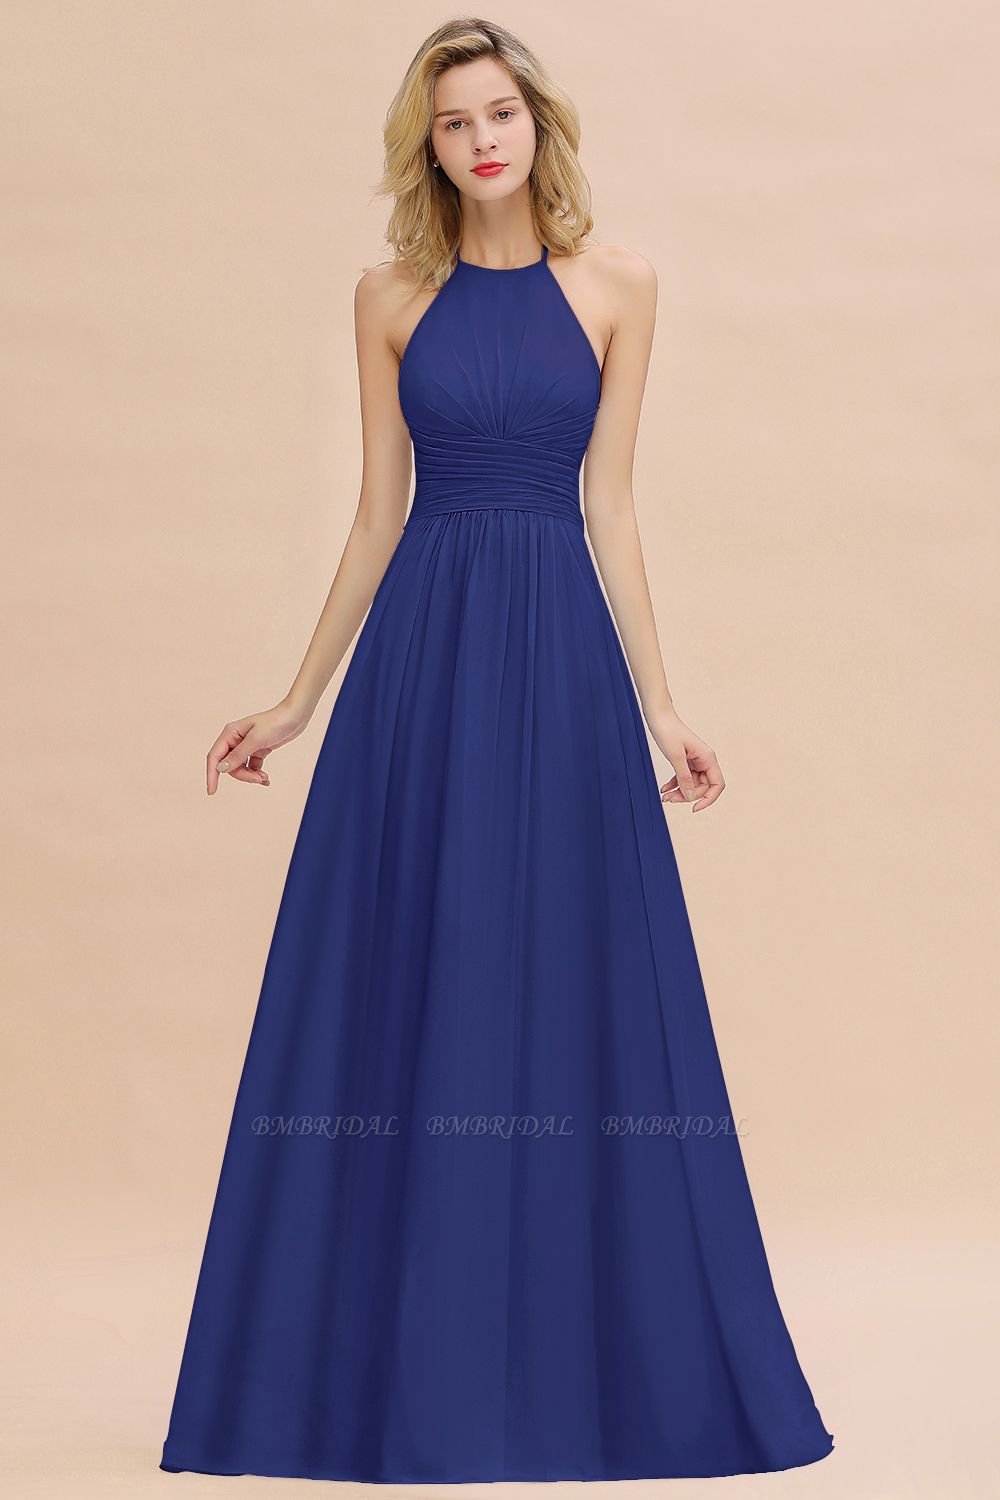 BMbridal Glamorous Halter Backless Long Affordable Bridesmaid Dresses with Ruffle